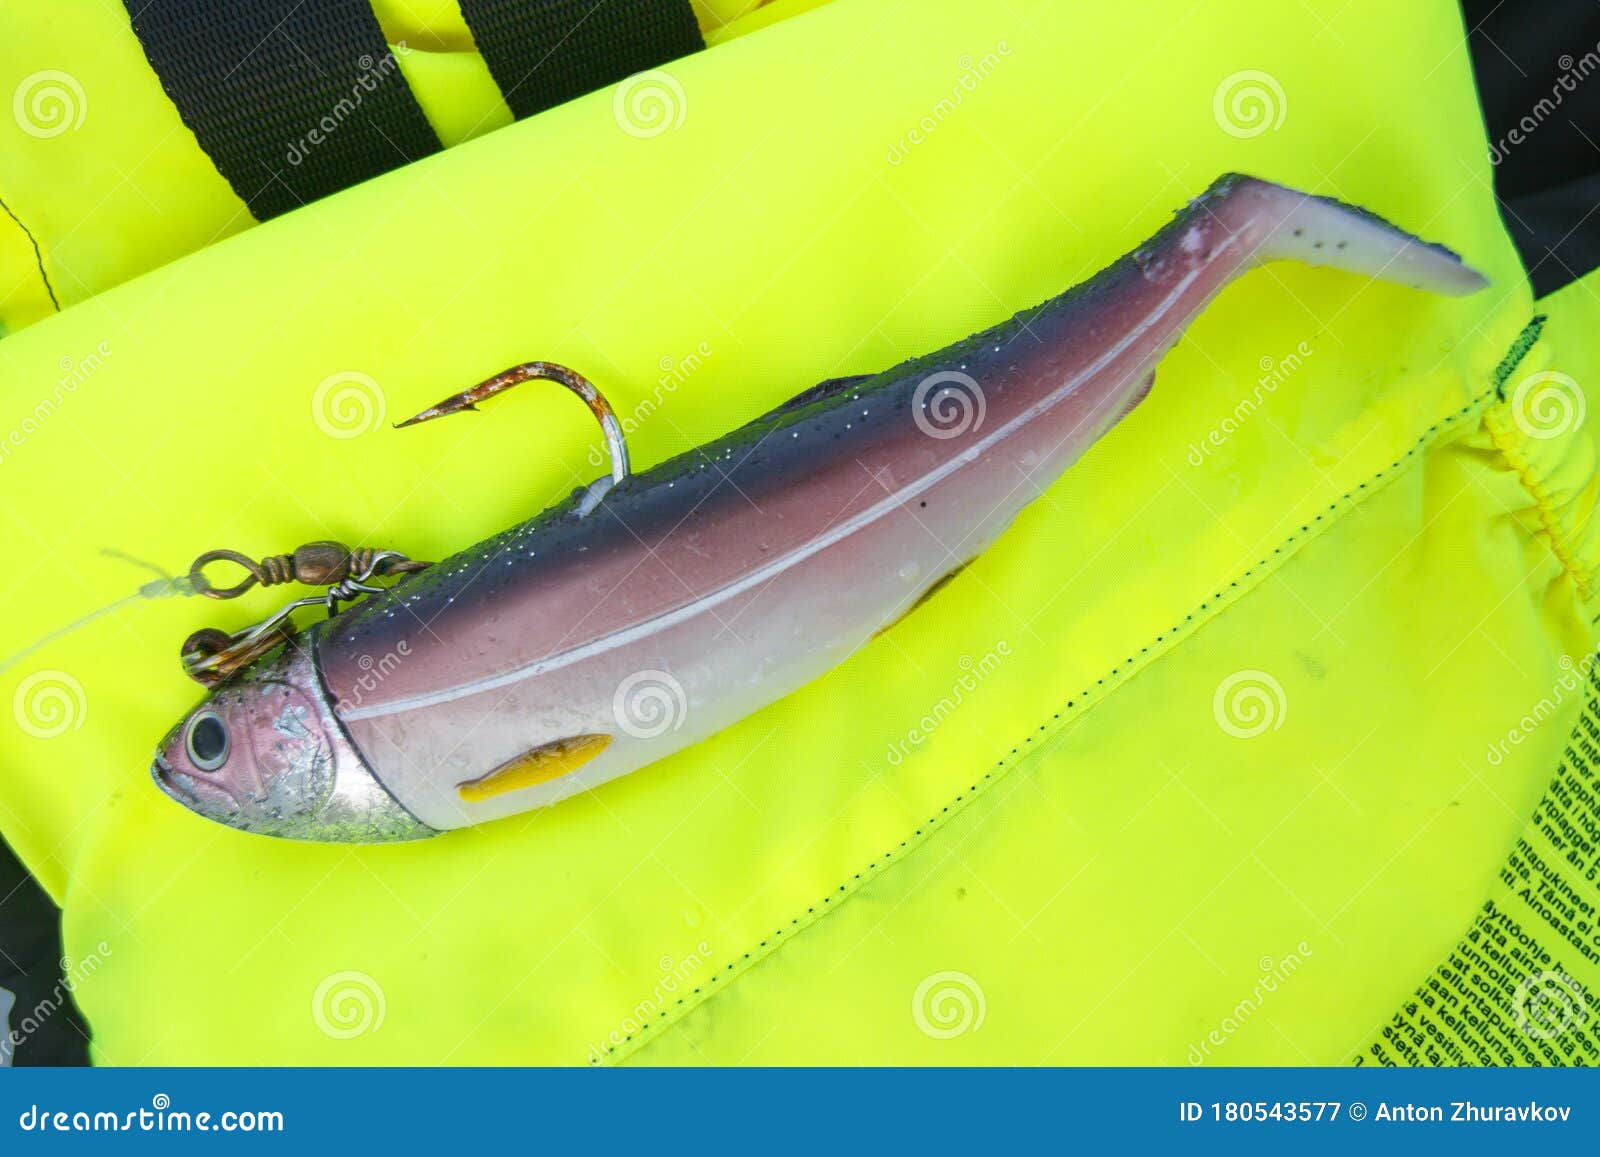 Big Fishing Silicone Bait with Hooks for Catching Cod Stock Image - Image  of fish, spinning: 180543577